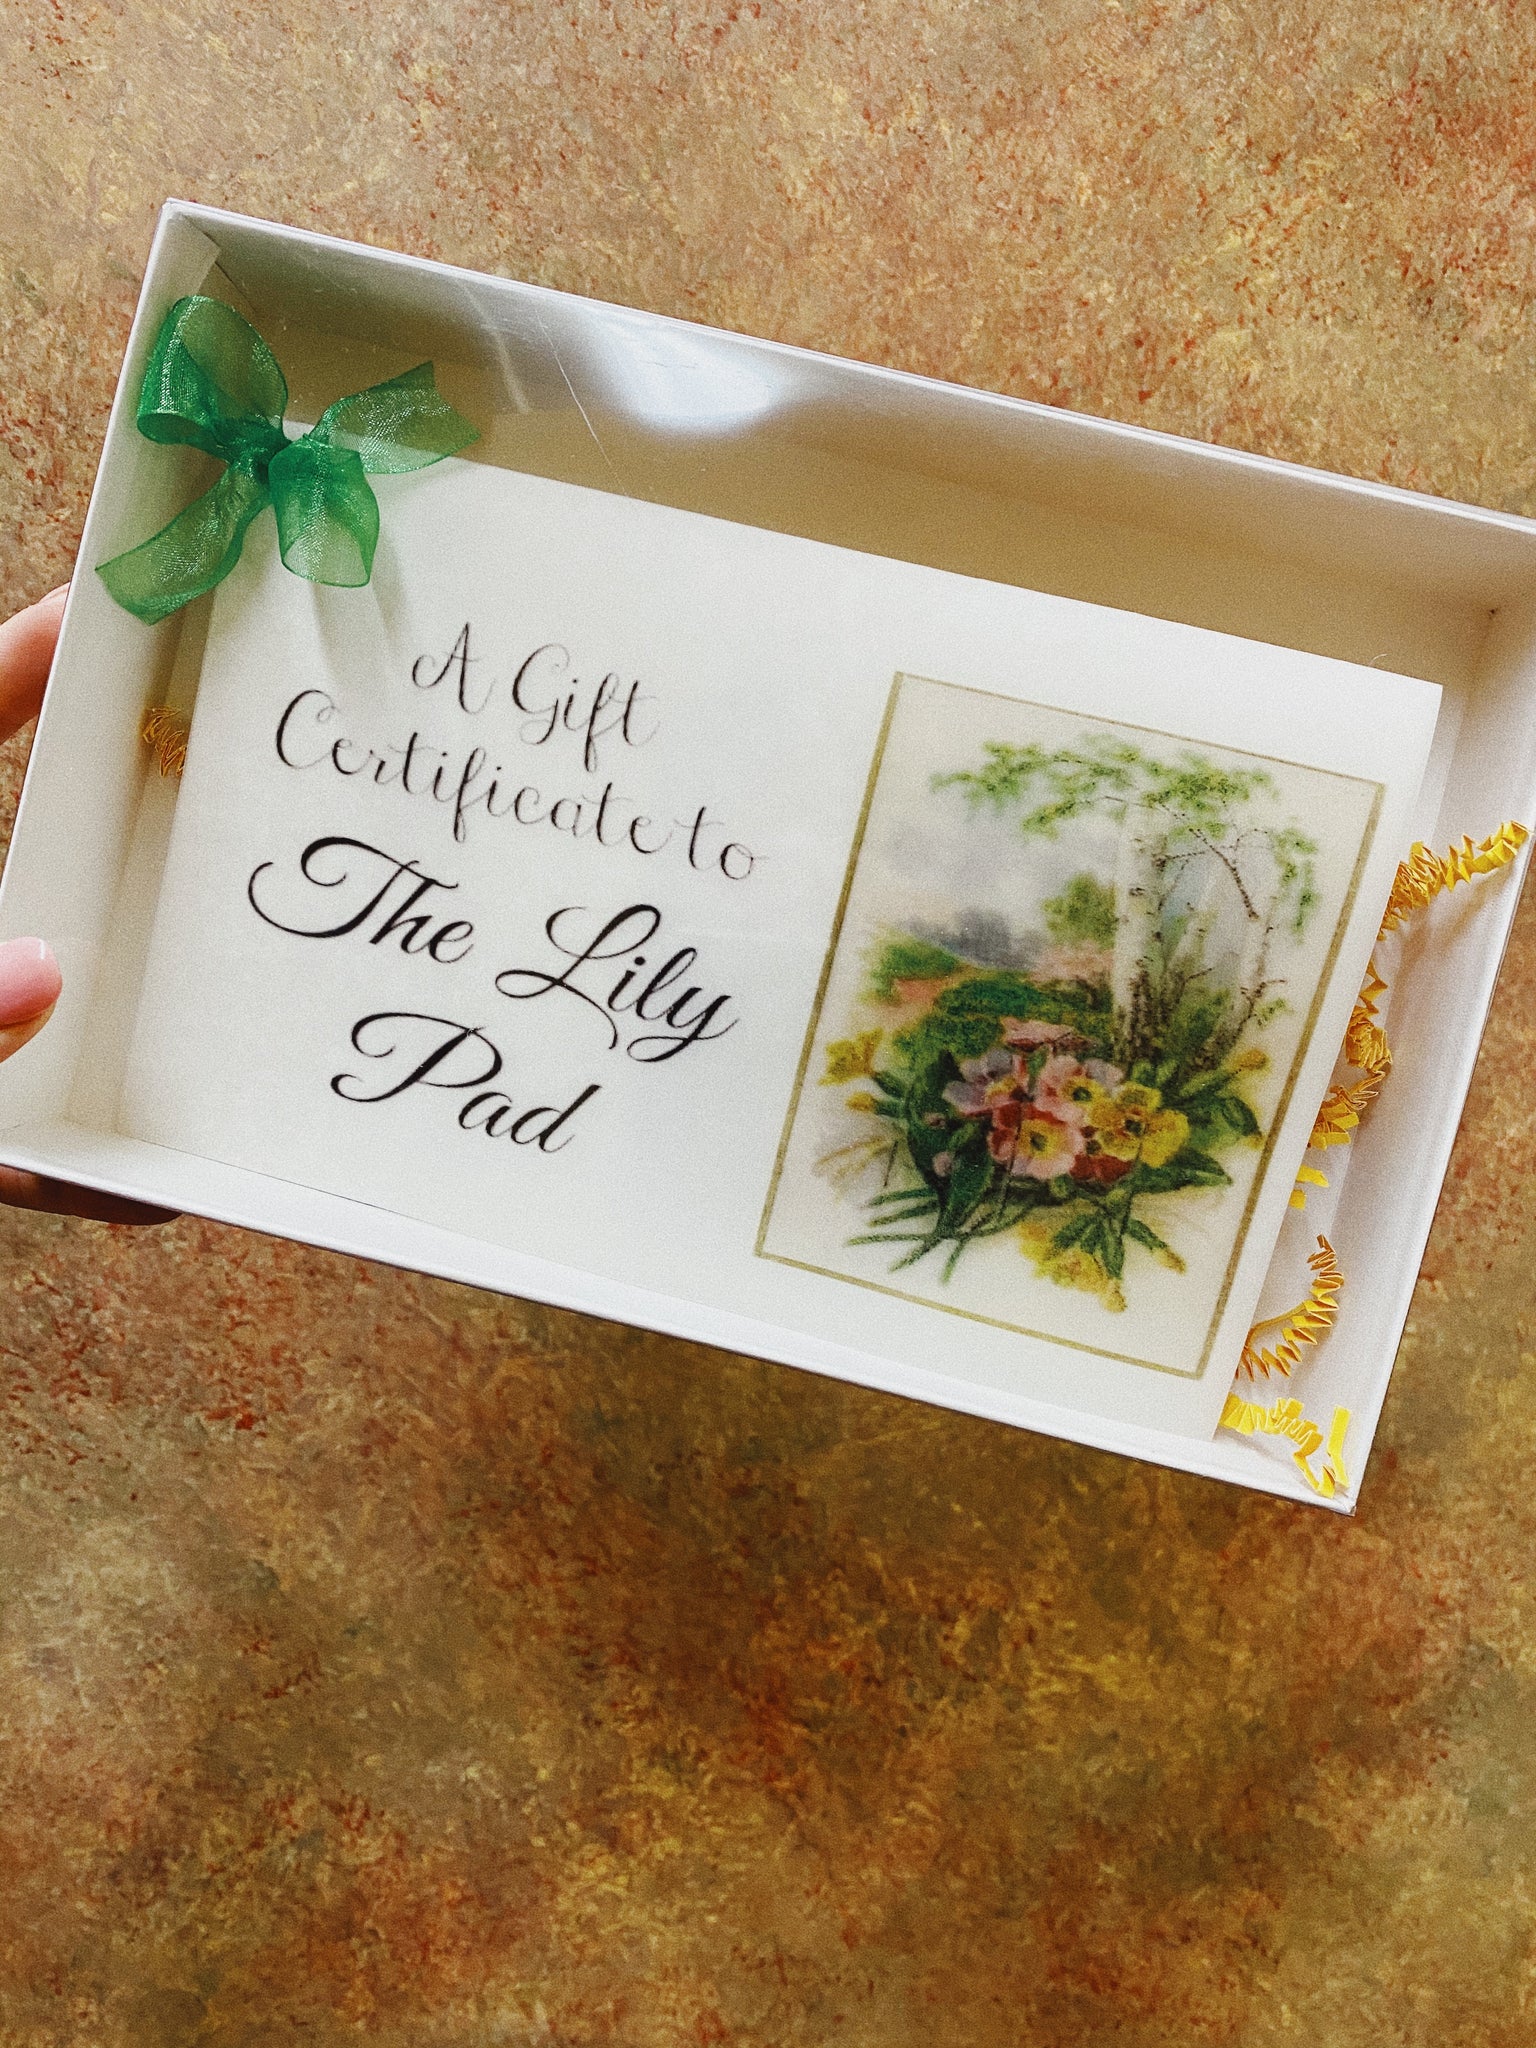 Lily Pad Gift Certificate - $100